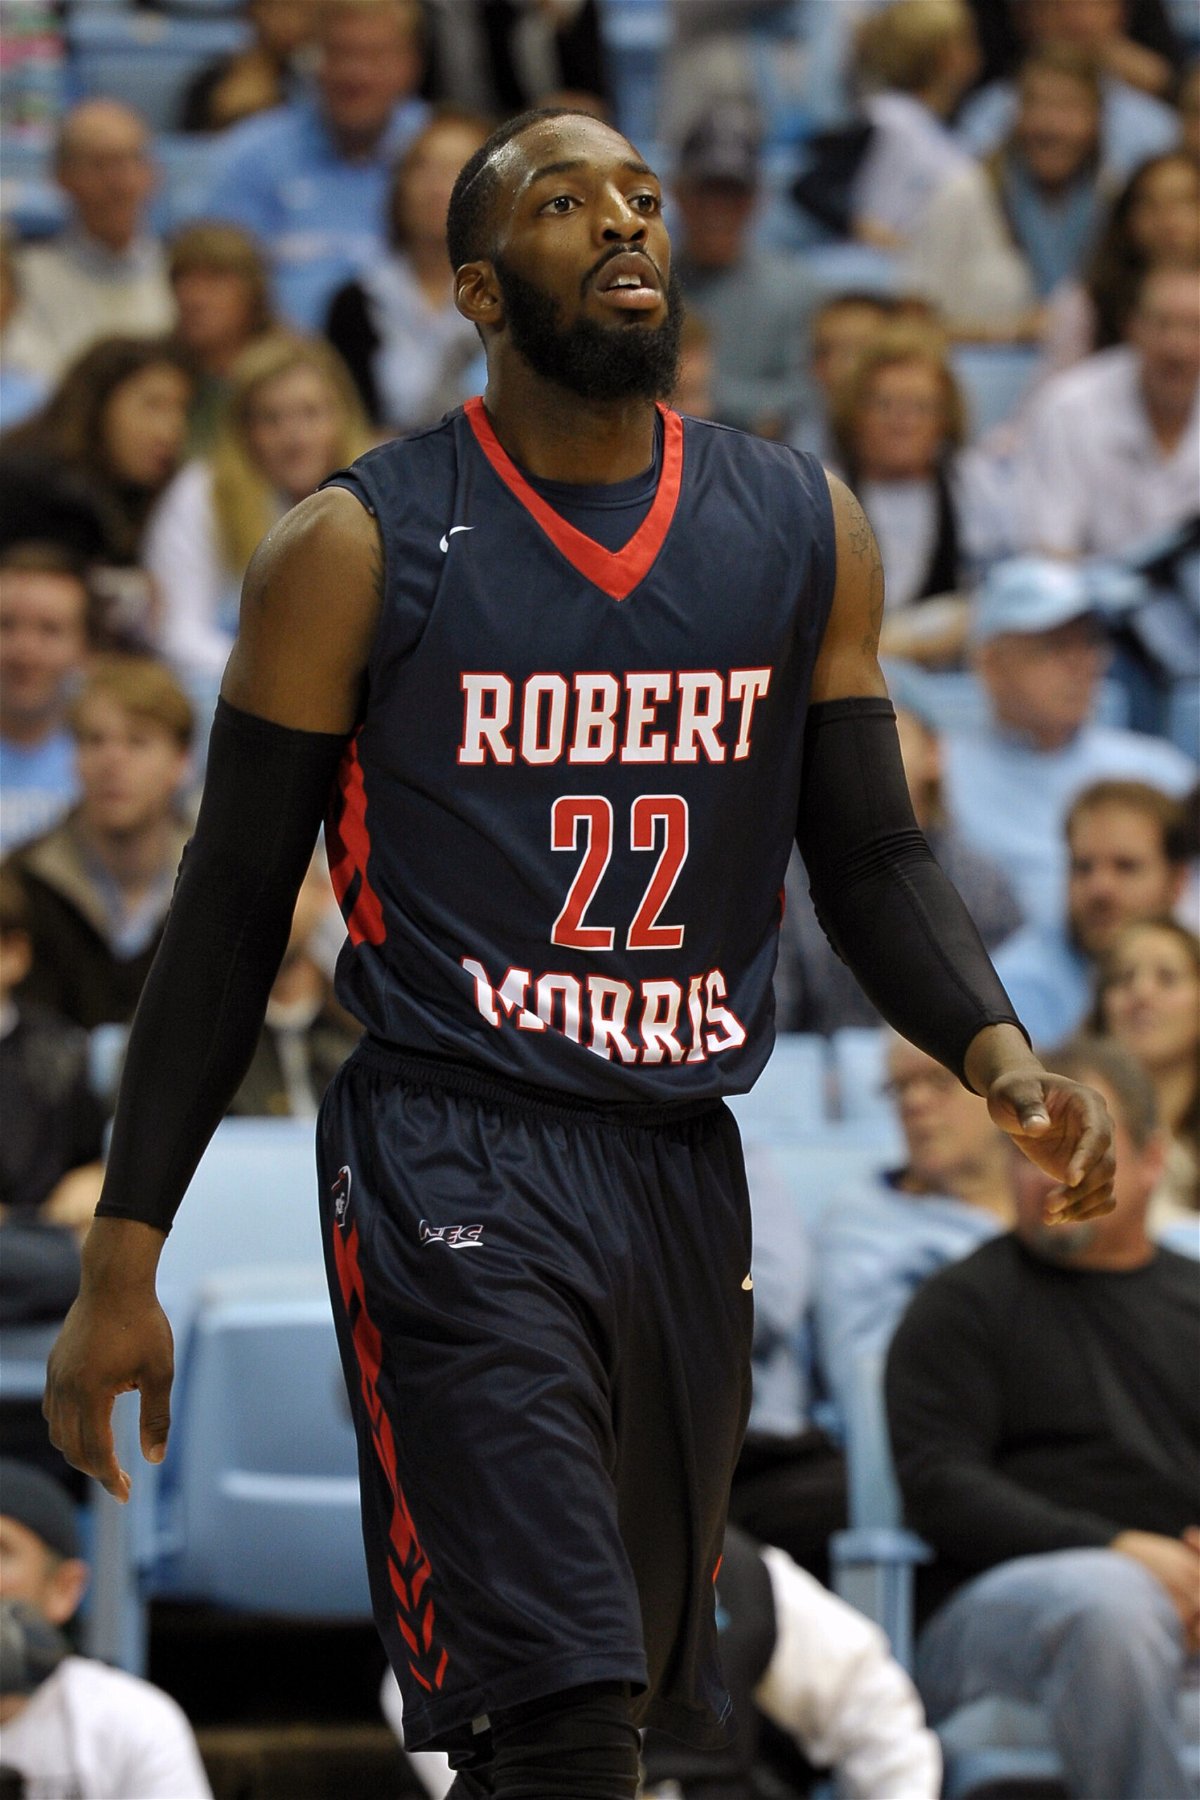 <i>Lance King/Getty Images/File</i><br/>A 2014 photo shows Lucky Jones during a basketball game when he played for Robert Morris University.